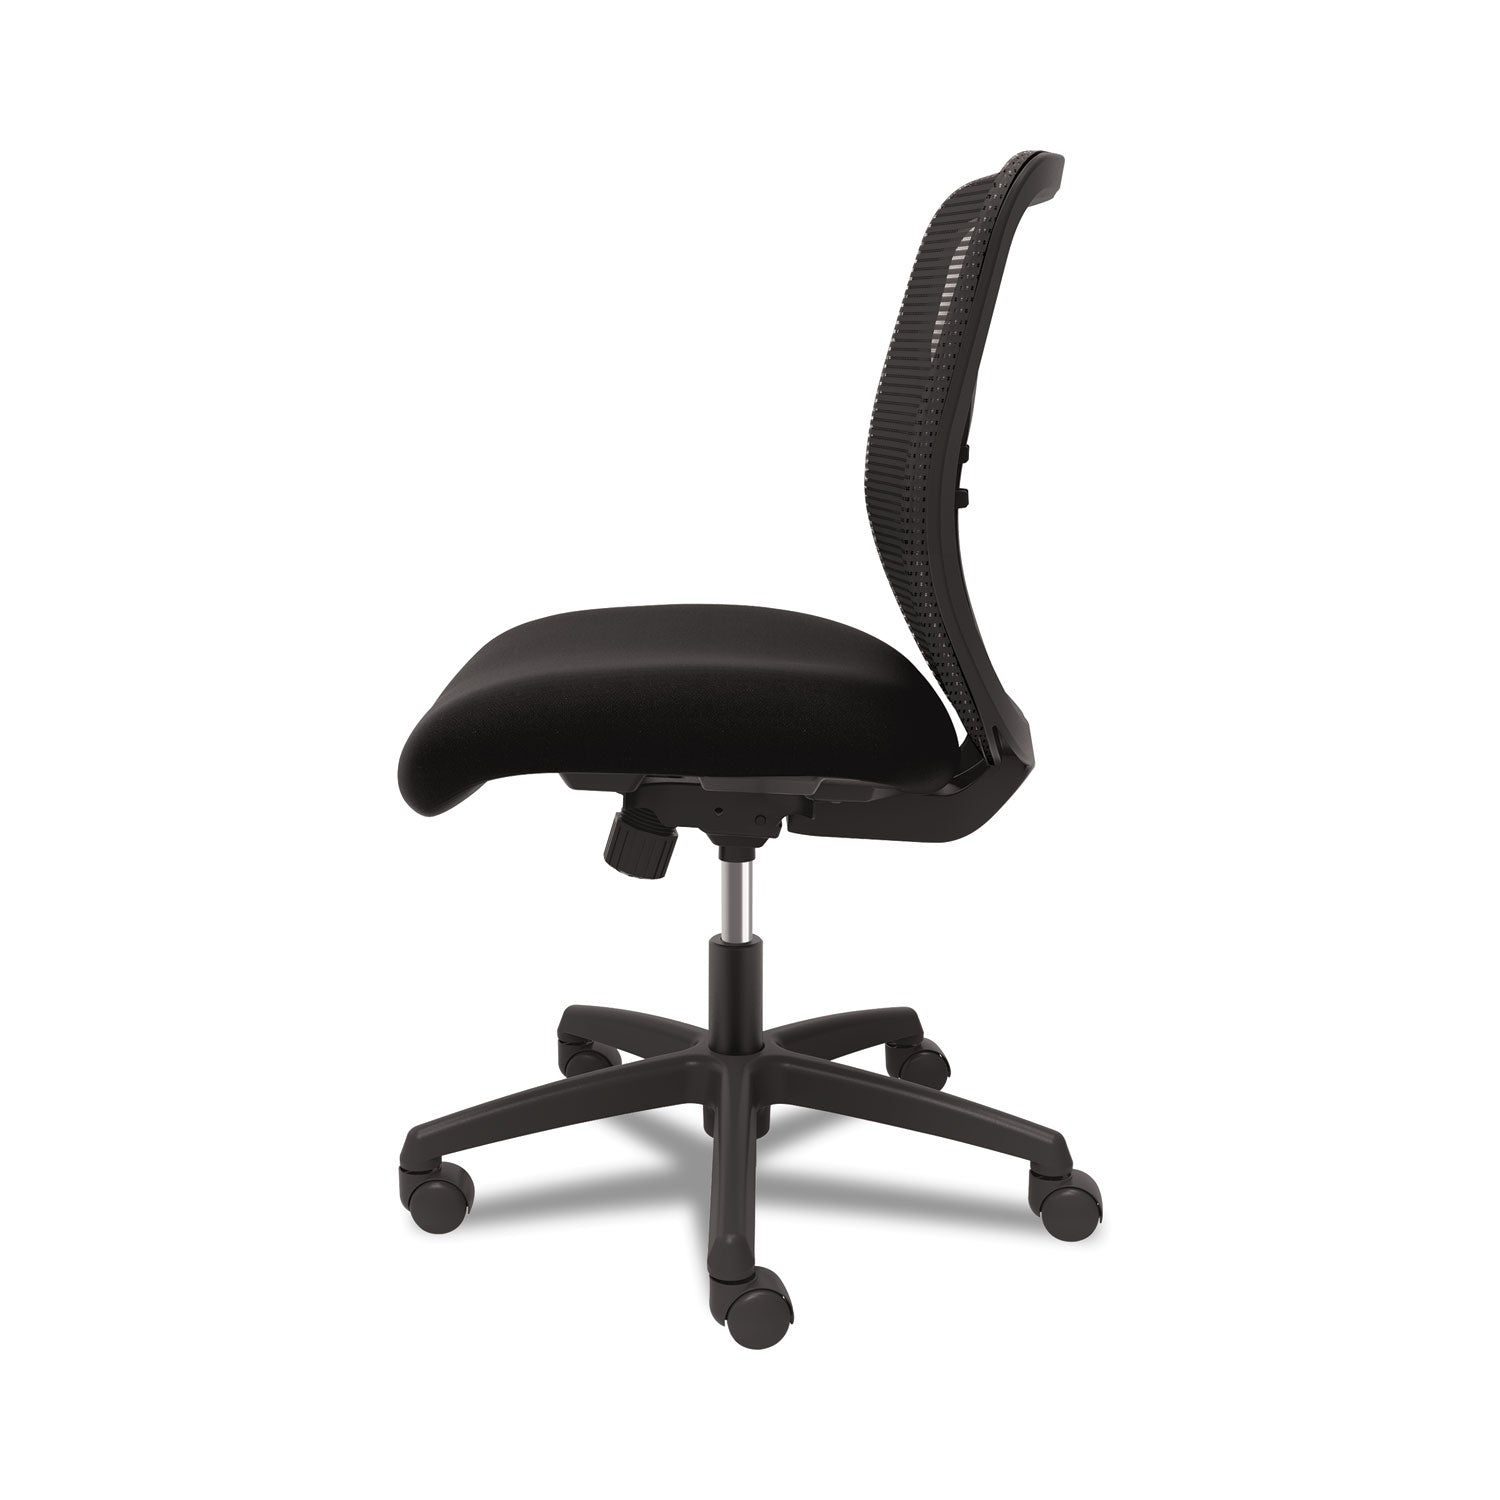 gateway-mid-back-task-chair-supports-up-to-250-lb-17-to-22-seat-height-black_hongvnmz1accf10 - 3